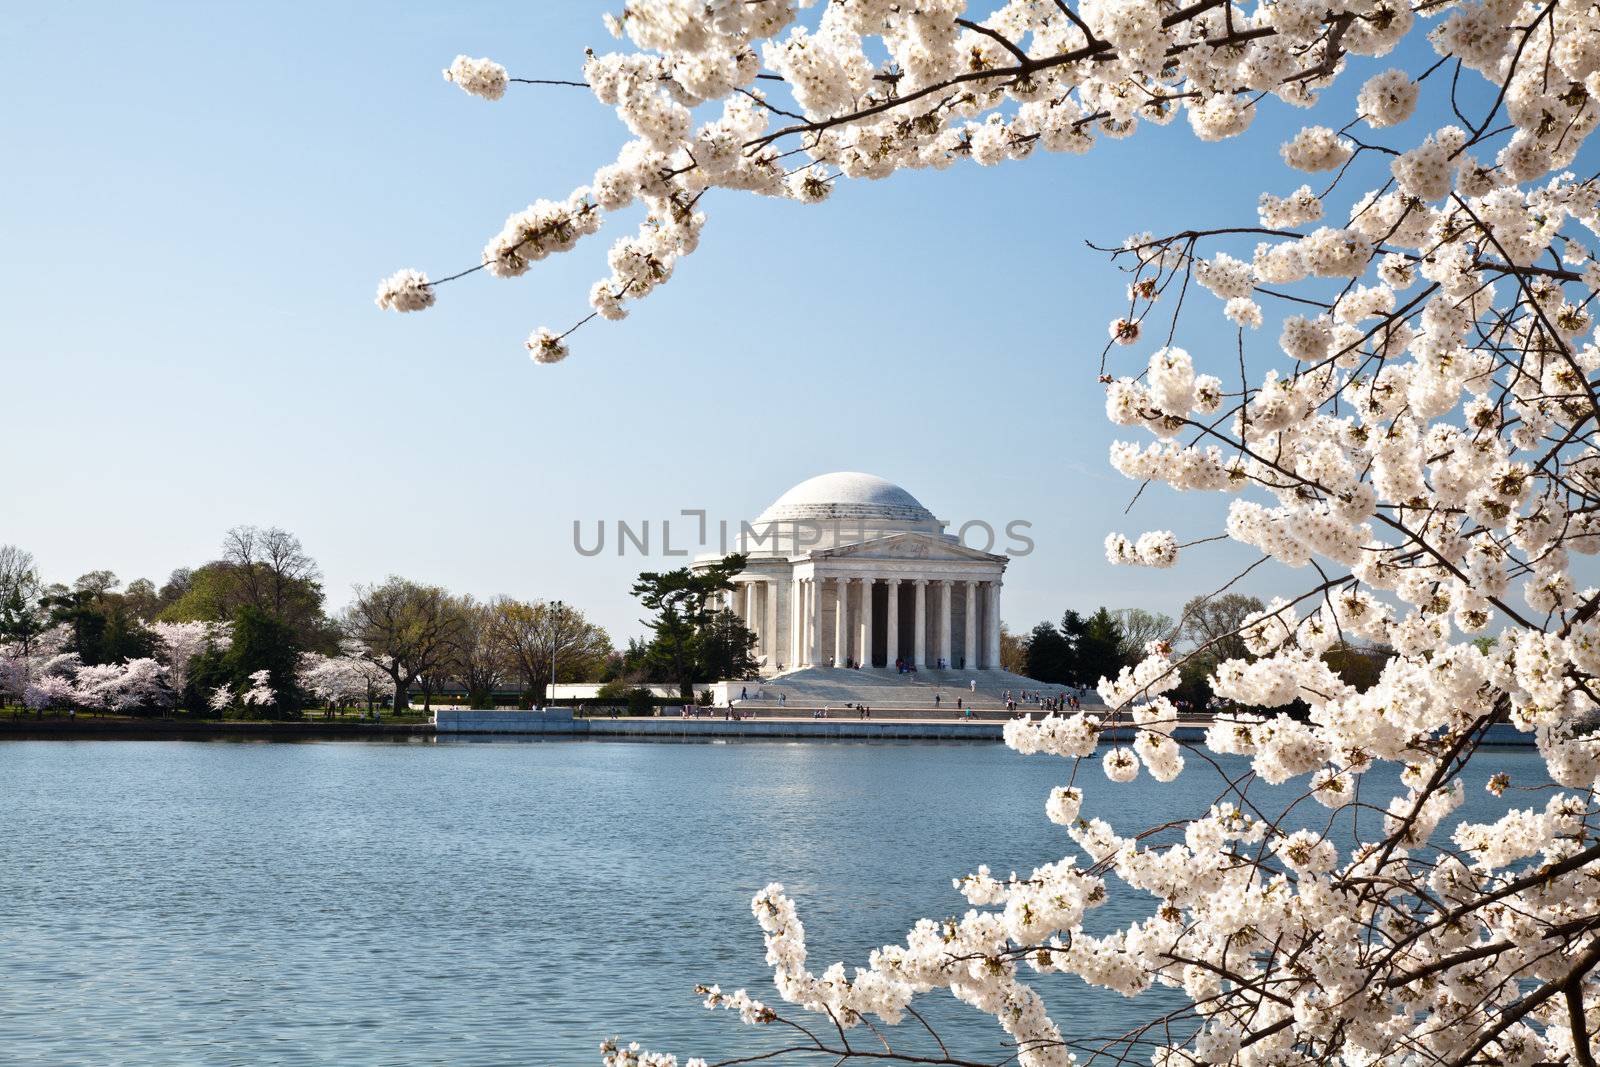 Cherry blossoms around the Tidal Basin in Washington DC with Jefferson Memorial